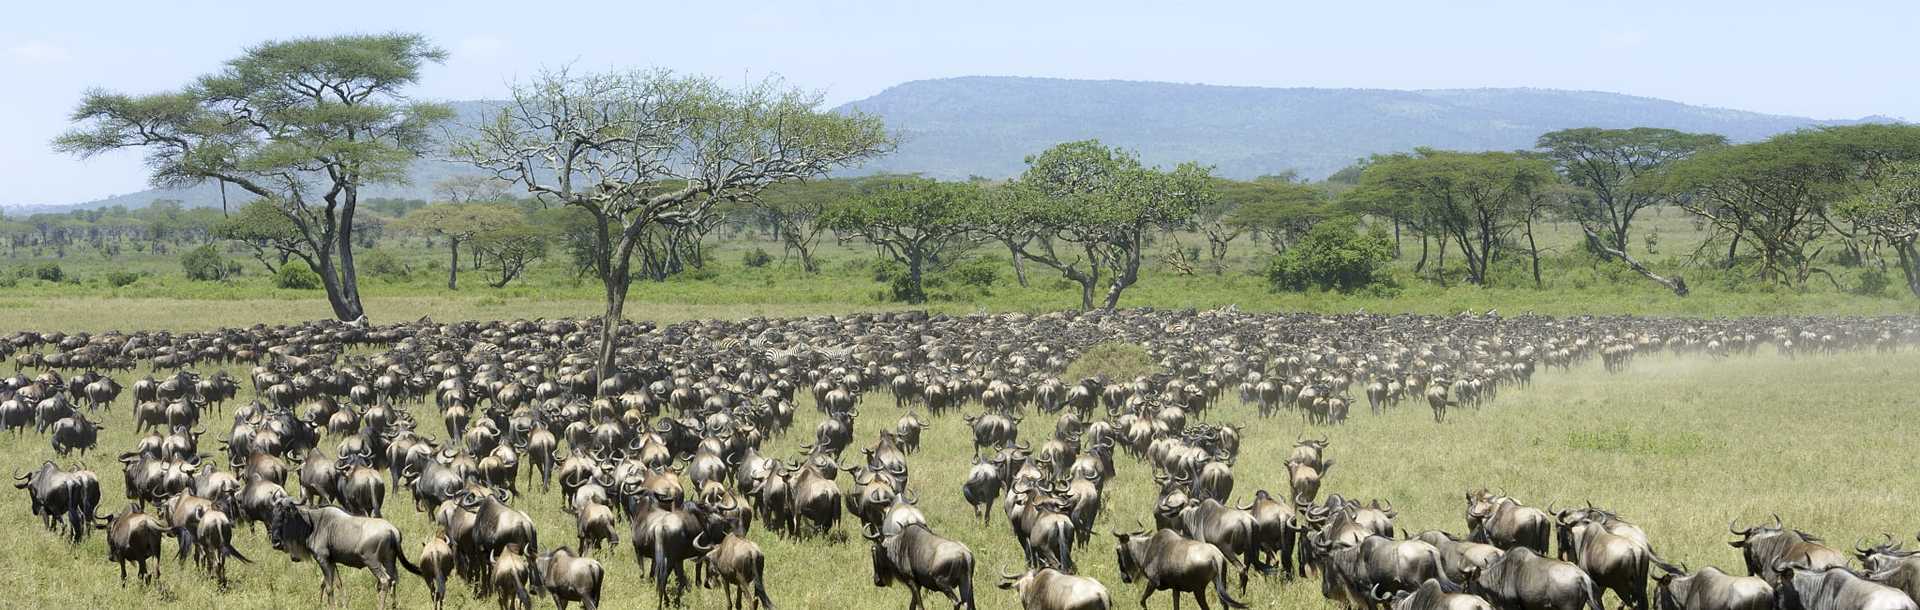 Herd of Blue Wildebeest seen from behind during migration in Serengeti National Park, Tanzania